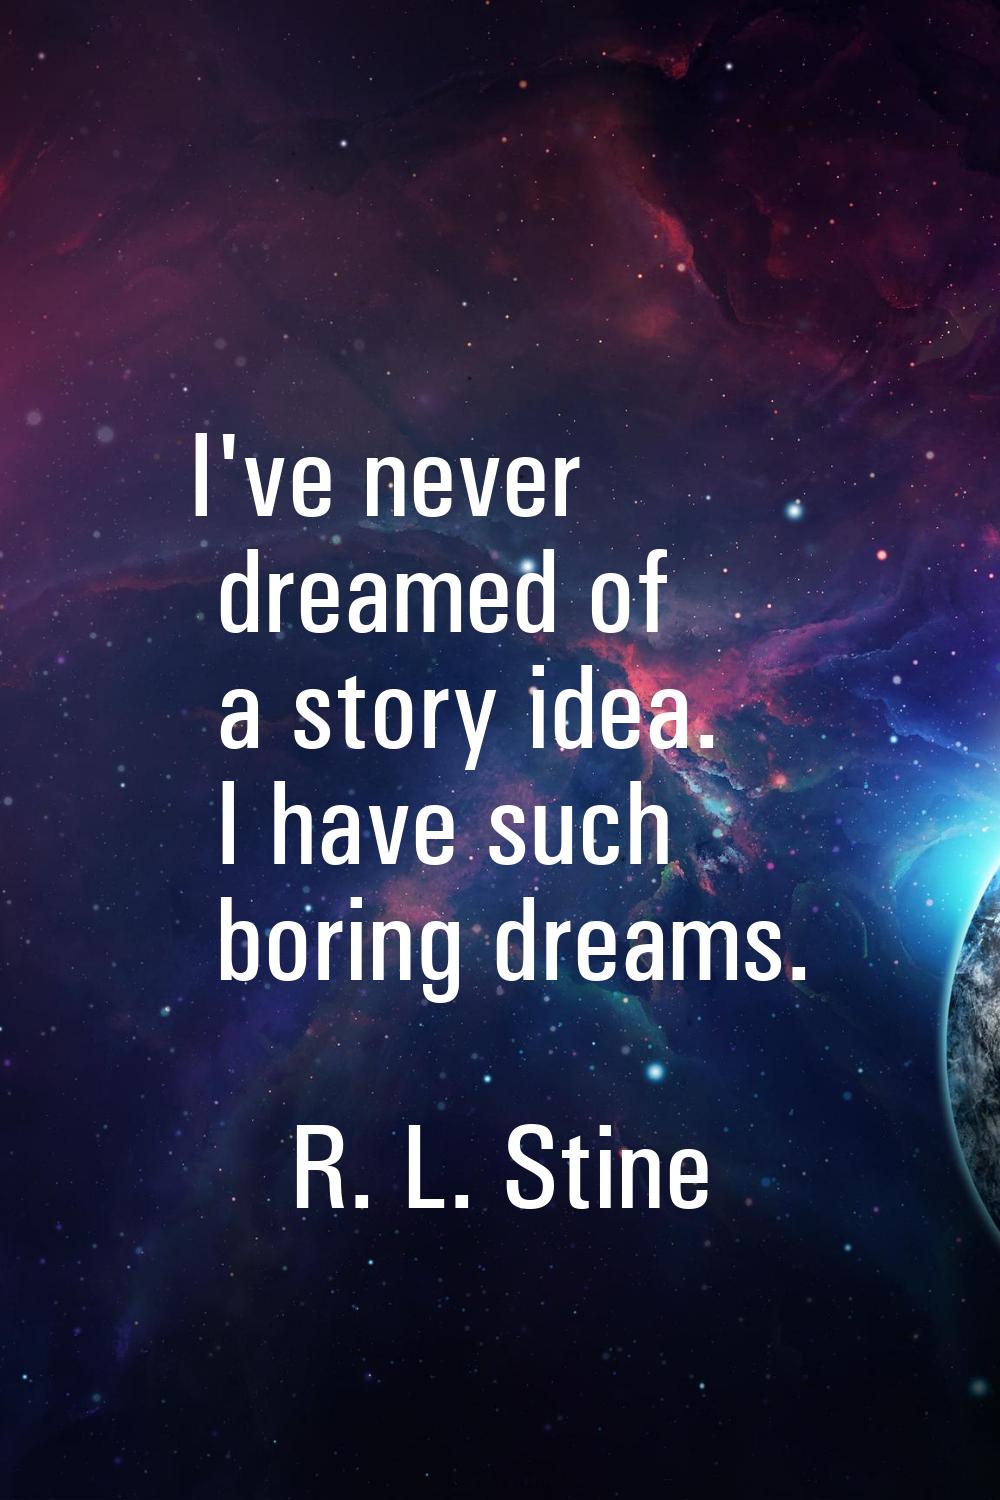 I've never dreamed of a story idea. I have such boring dreams.